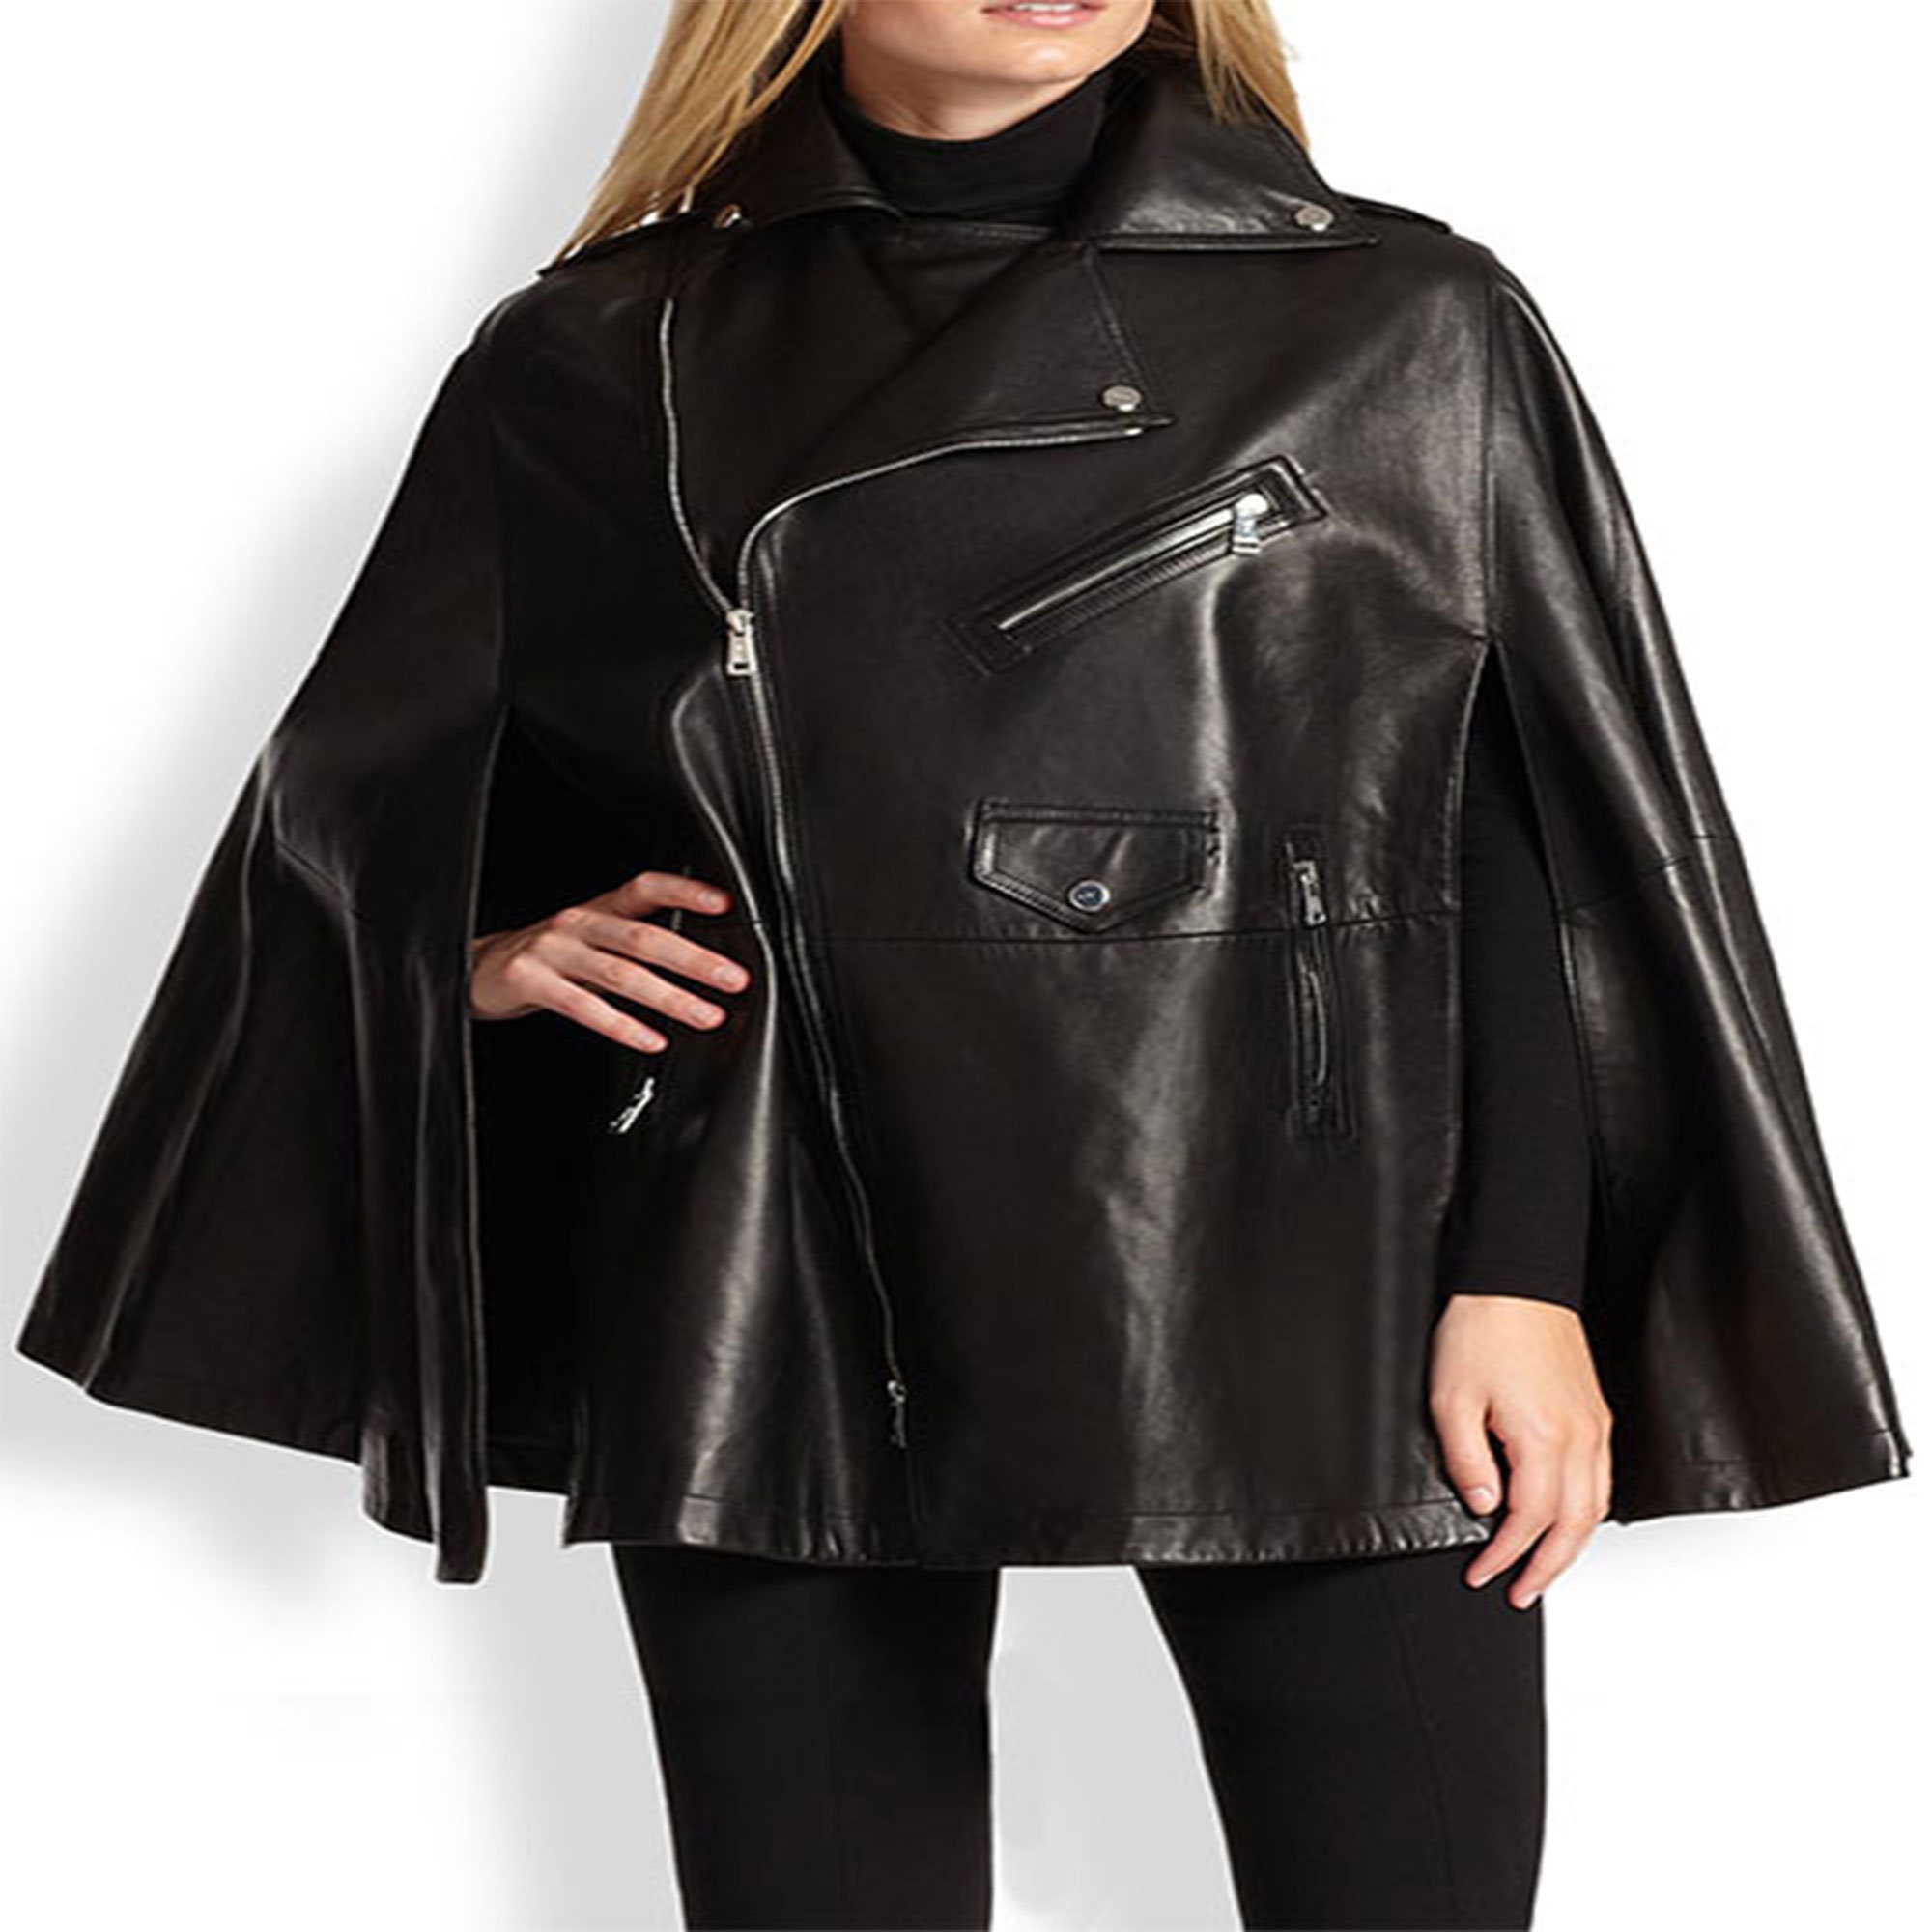 periode grens Eed Leather poncho cape - Etsy Nederland